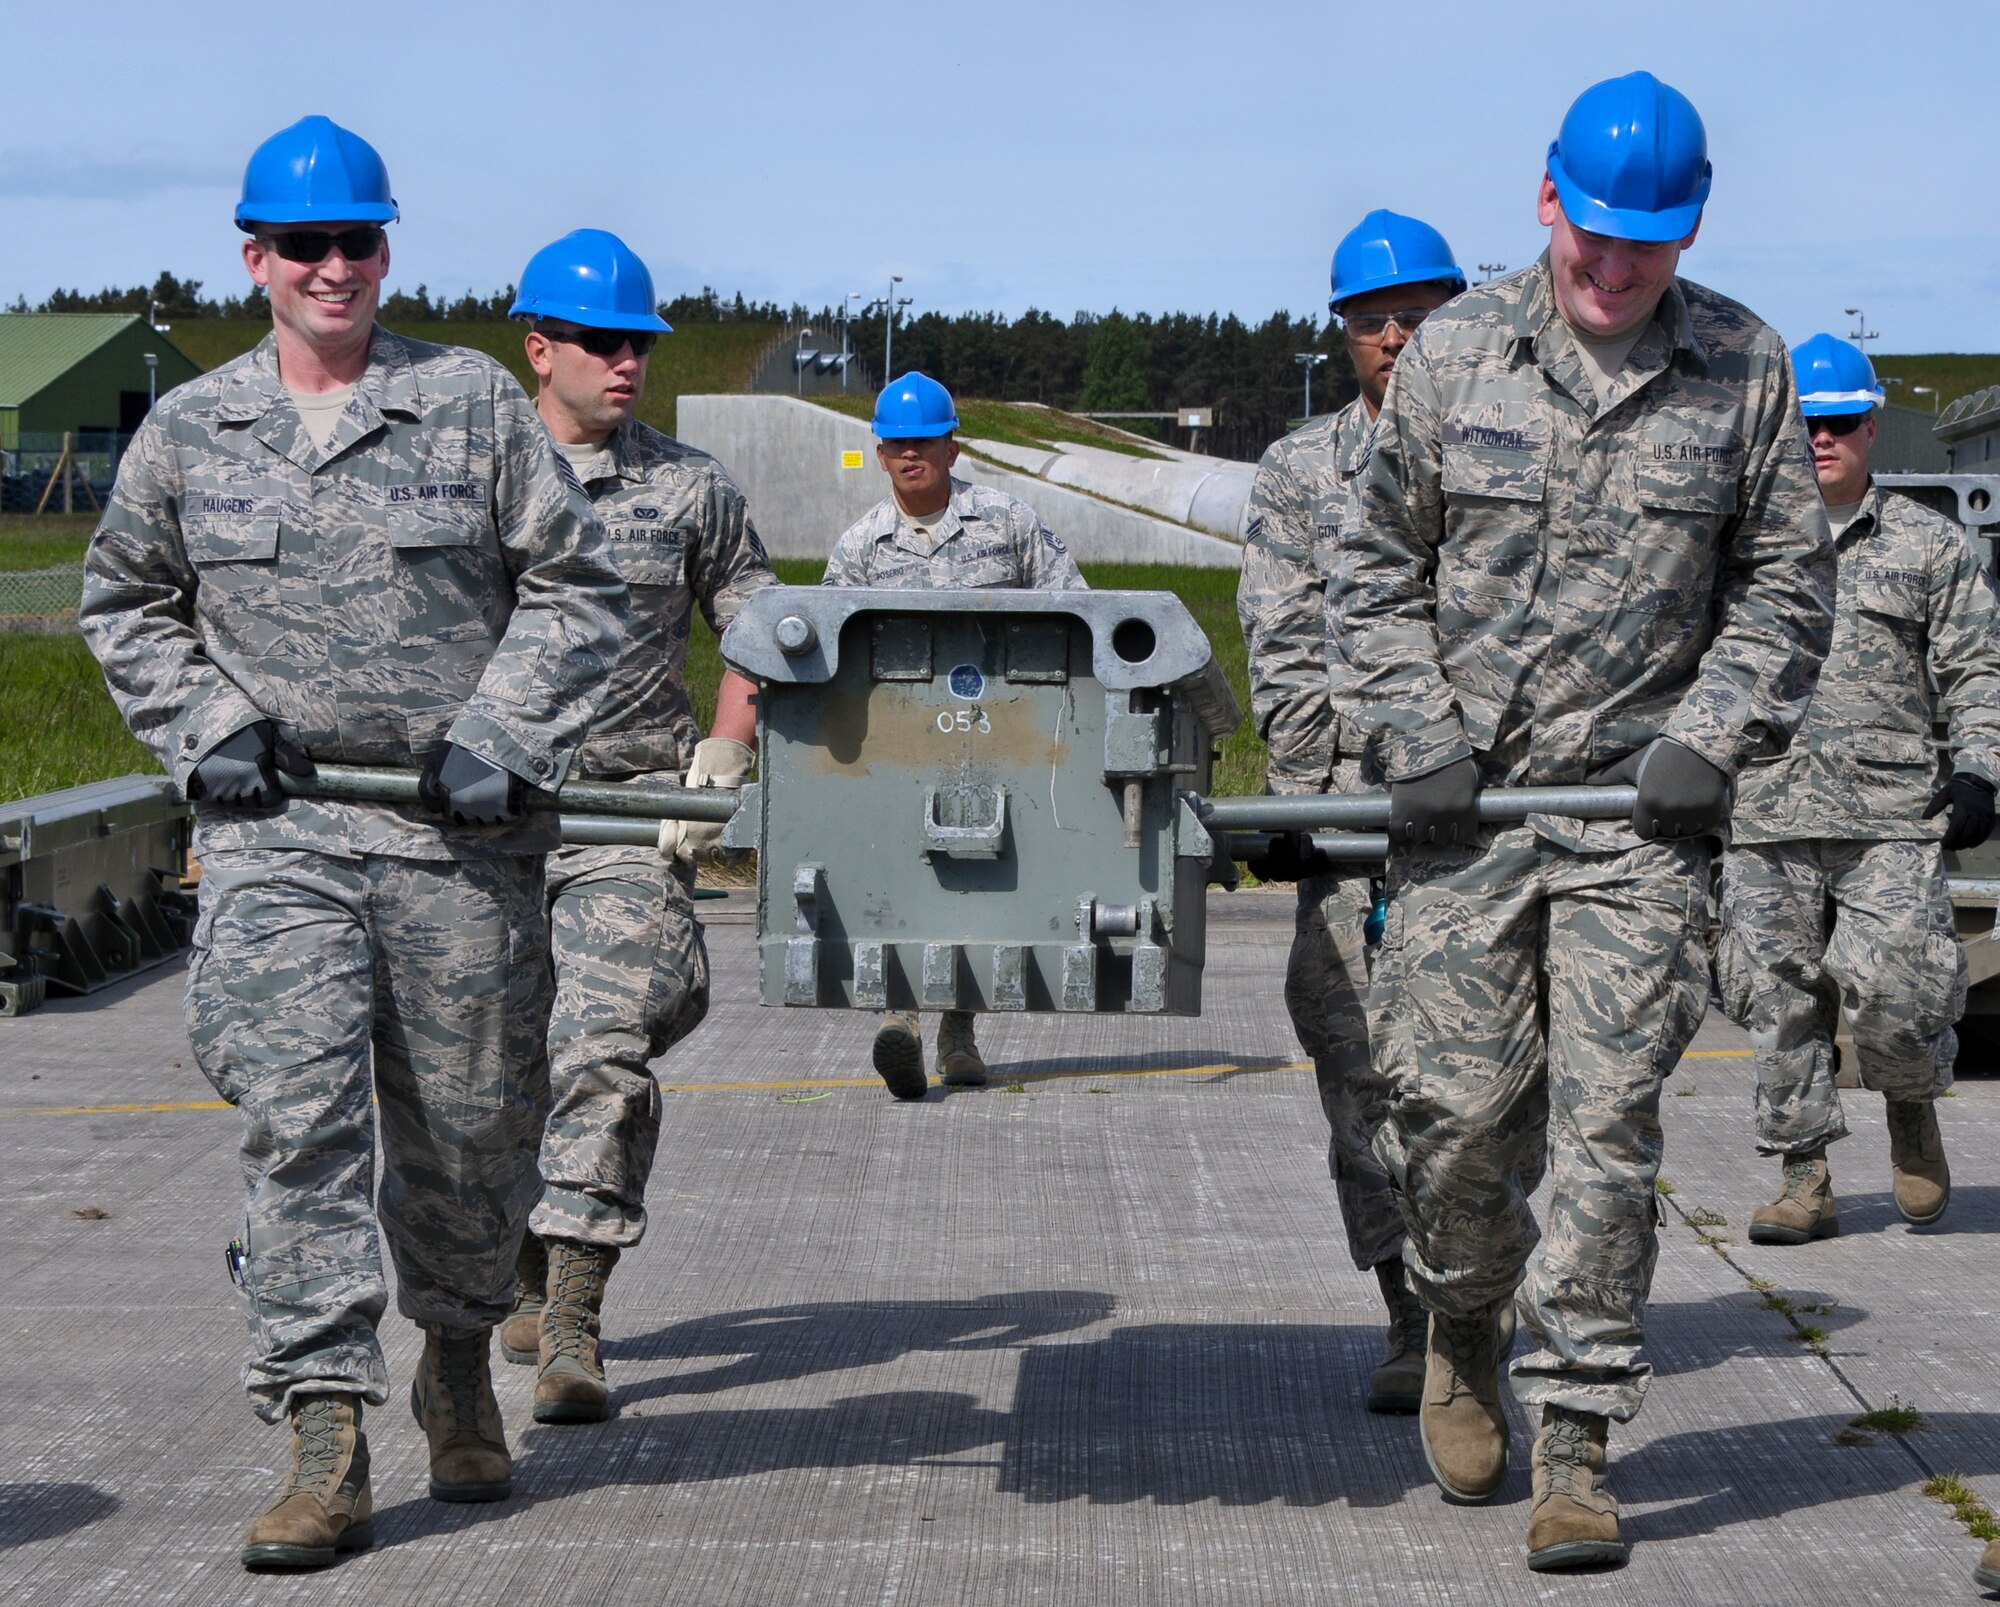 U.S. Air Force Airmen with the Civil Engineering Squadron of the 128th Air Refueling Wing, Wisconsin Air National Guard, work together to move training equipment June 9, 2015, at Kinloss Barracks in Morayshire, Scotland, United Kingdom, in support of Exercise Flying Rose. Exercise Flying Rose is an exchange exercise between the U.S. Air National Guard and British Army, where forces deploy to one another’s countries and work to complete construction-related tasks. (U.S. Air National Guard photo by Airman 1st Class Morgan R. Lipinski/Released)